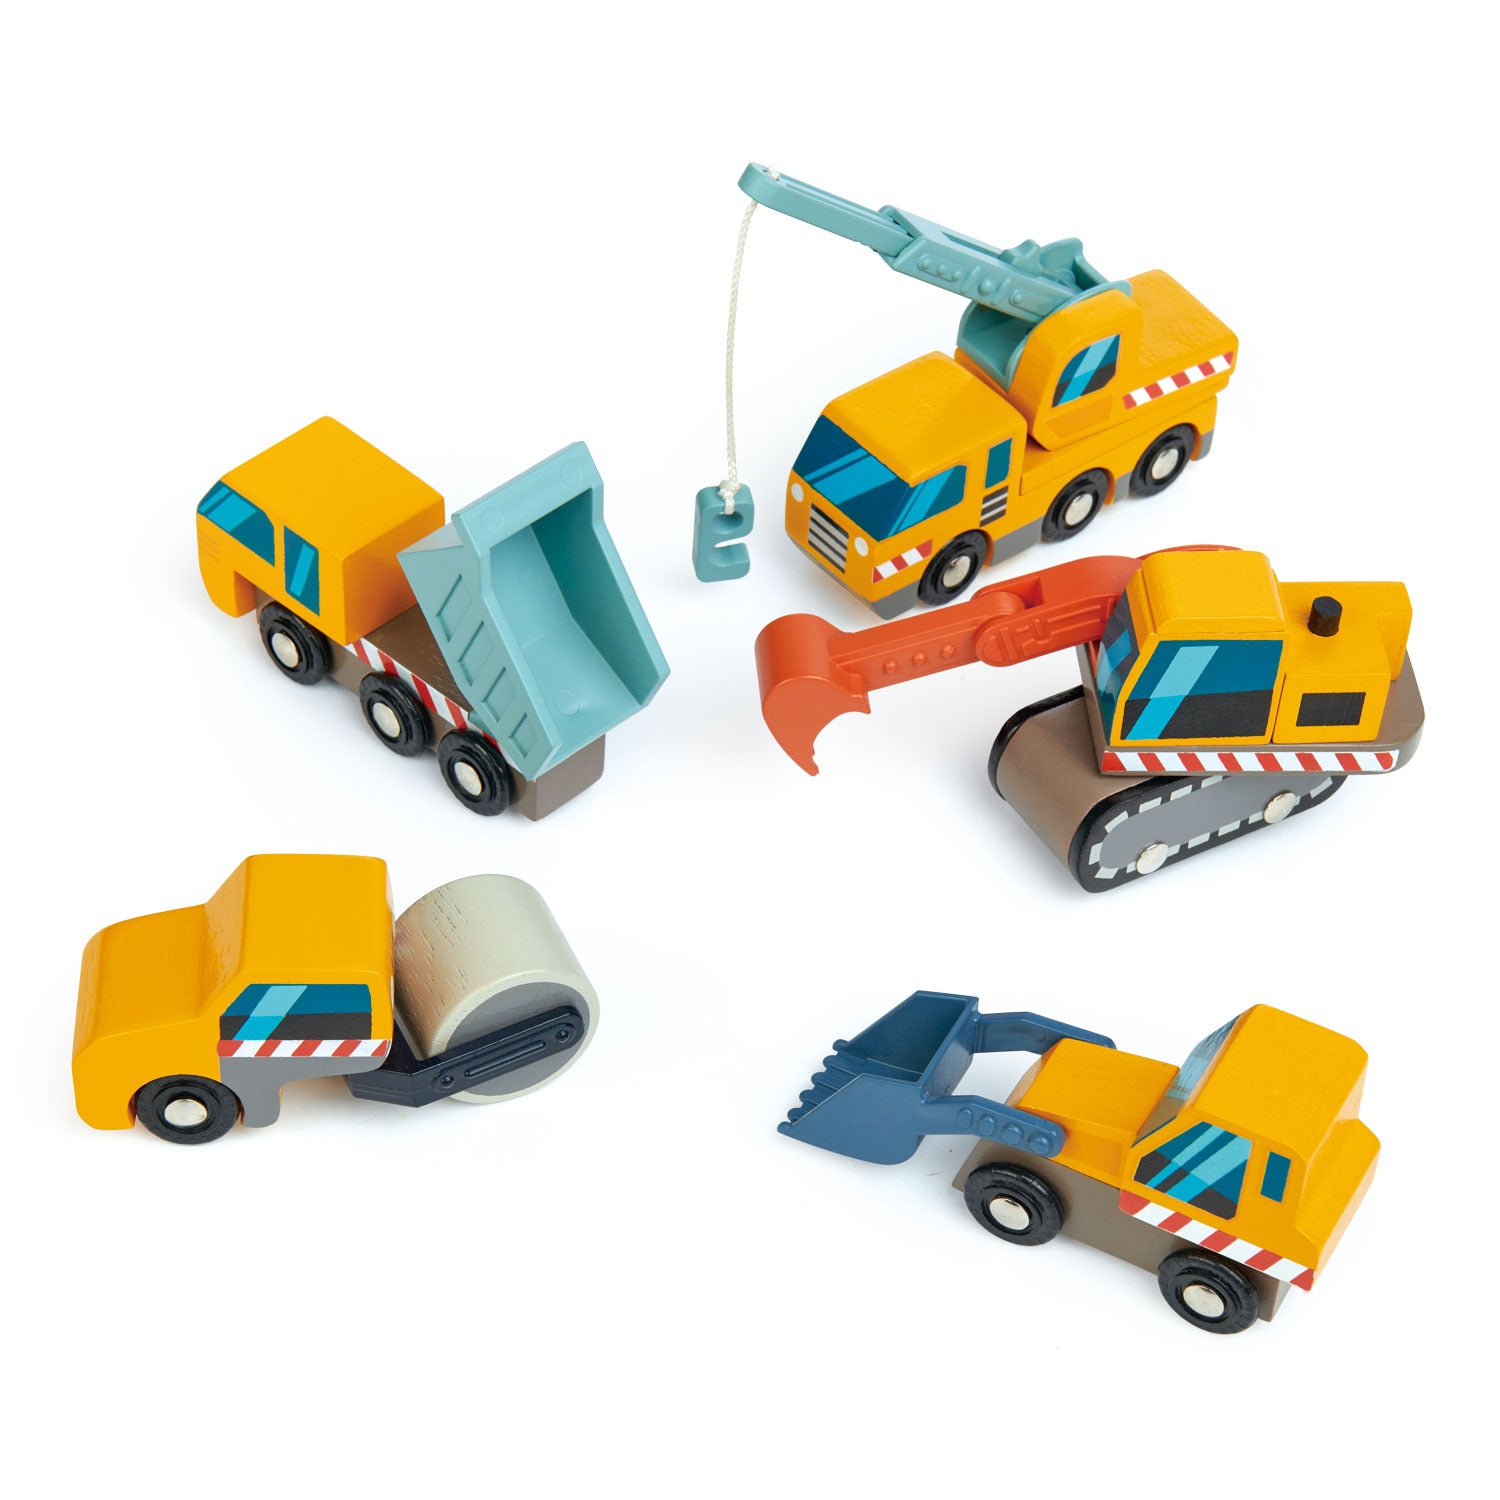 <p>A collection of construction vehicles, including dump truck, front loader, excavation digger, crane truck, road roller. All with moving parks and painted in realistic and contemporary colors. Standard wheel width fits on all train track.</p>
<p>Age range: 3 Years And Older</p>
<p>Product size: 6.69 x 6.1 x 2.76”    </p>
<p> Weight: 0.88 lbs</p>
